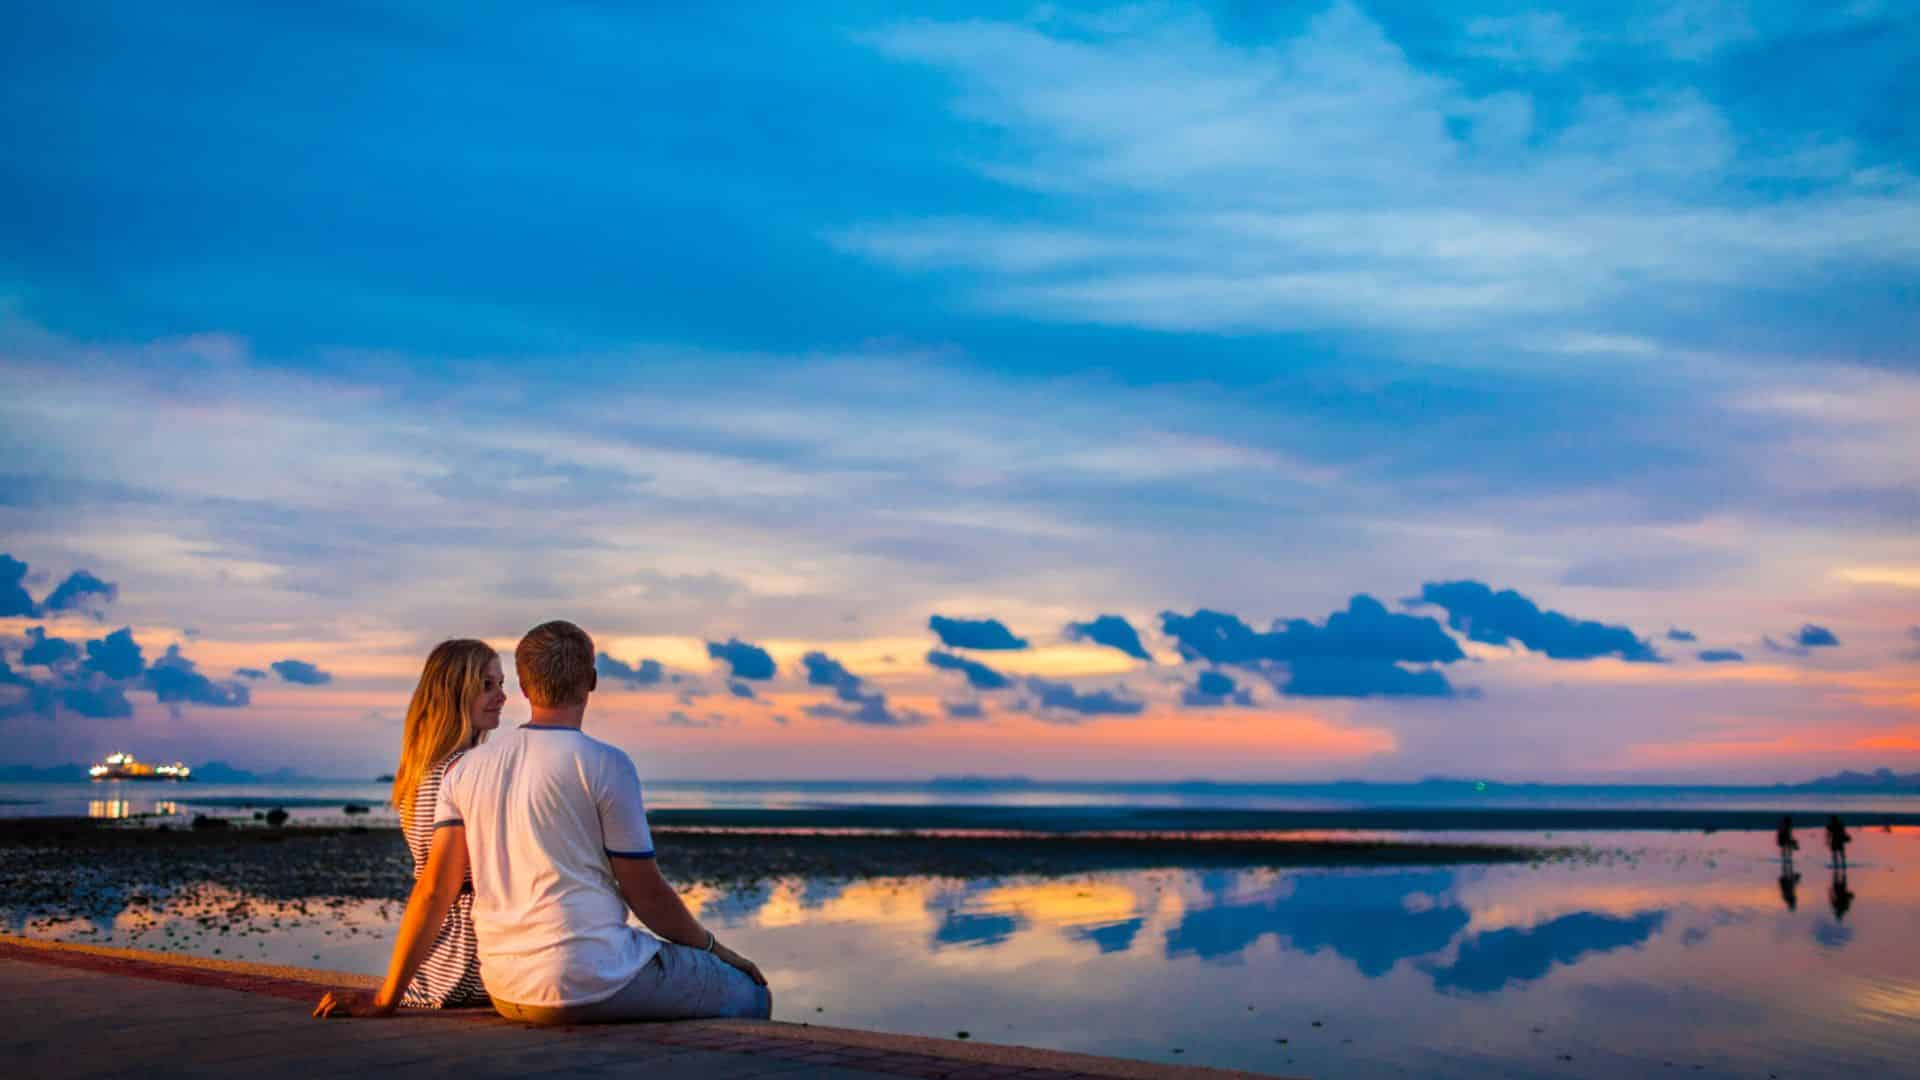 Couple together on a beach at sunset